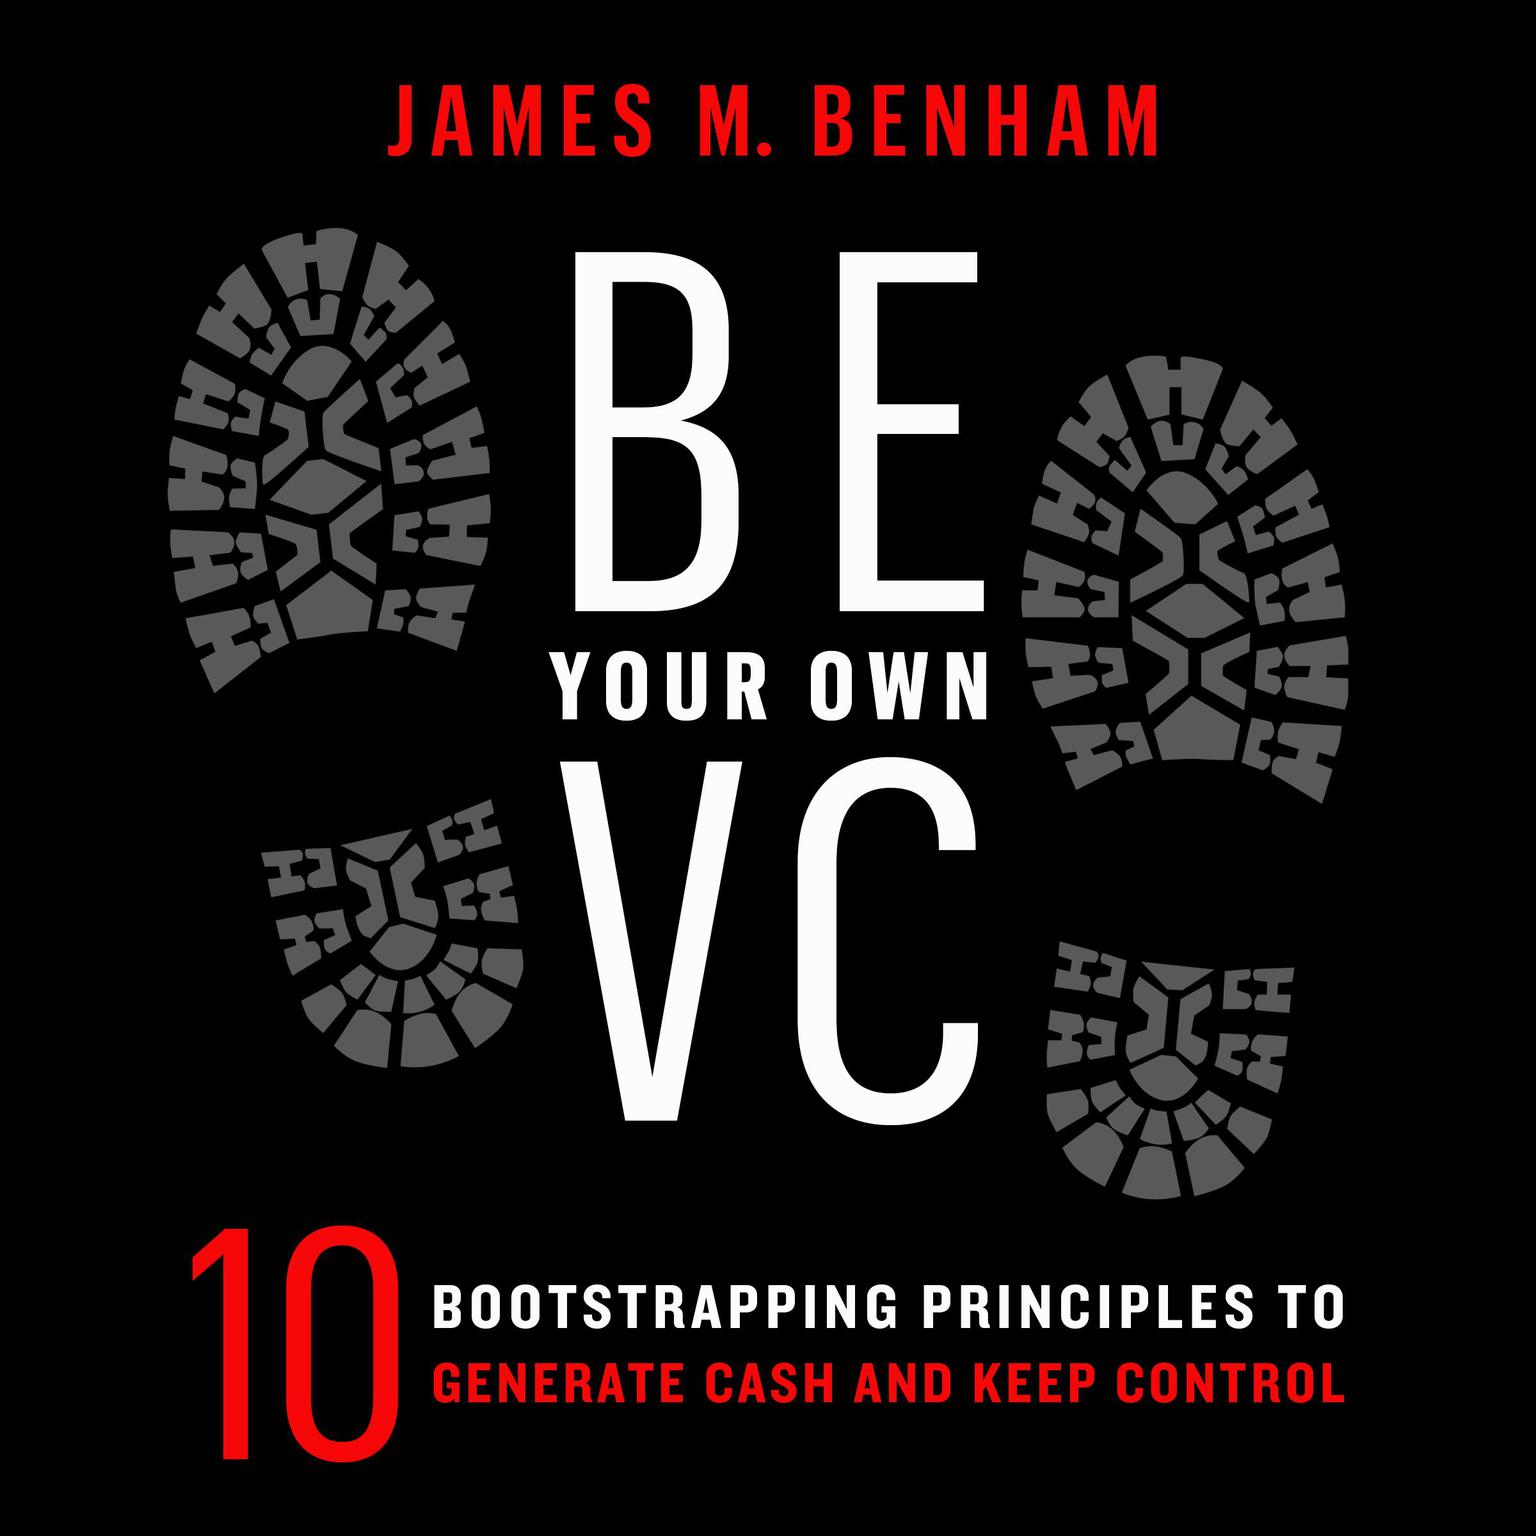 Be Your Own VC Audiobook, by James M. Benham